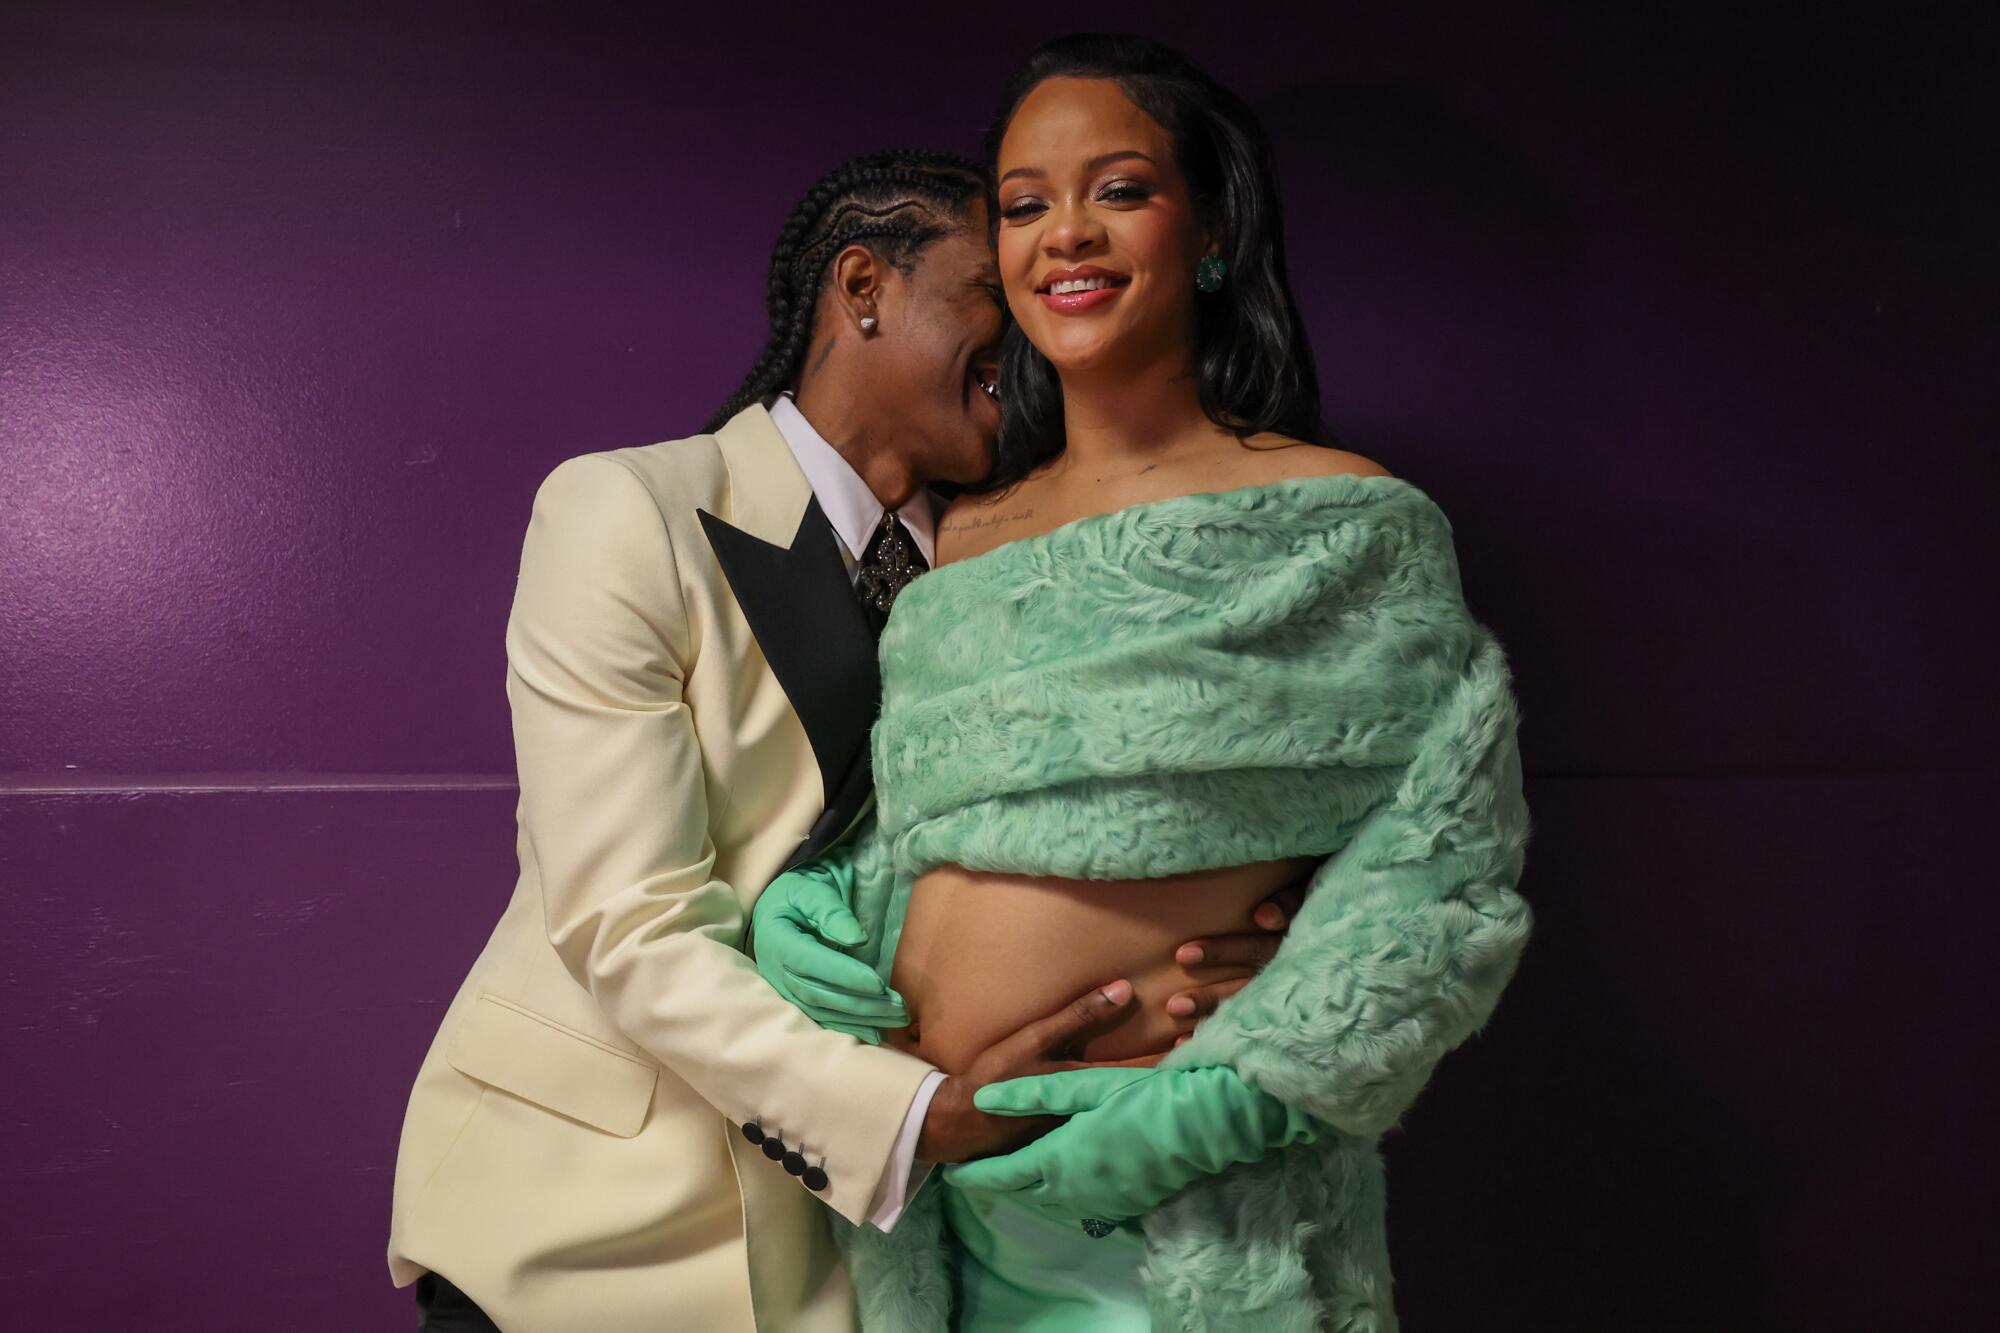 A man cuddles a pregnant woman backstage at the Academy Awards.